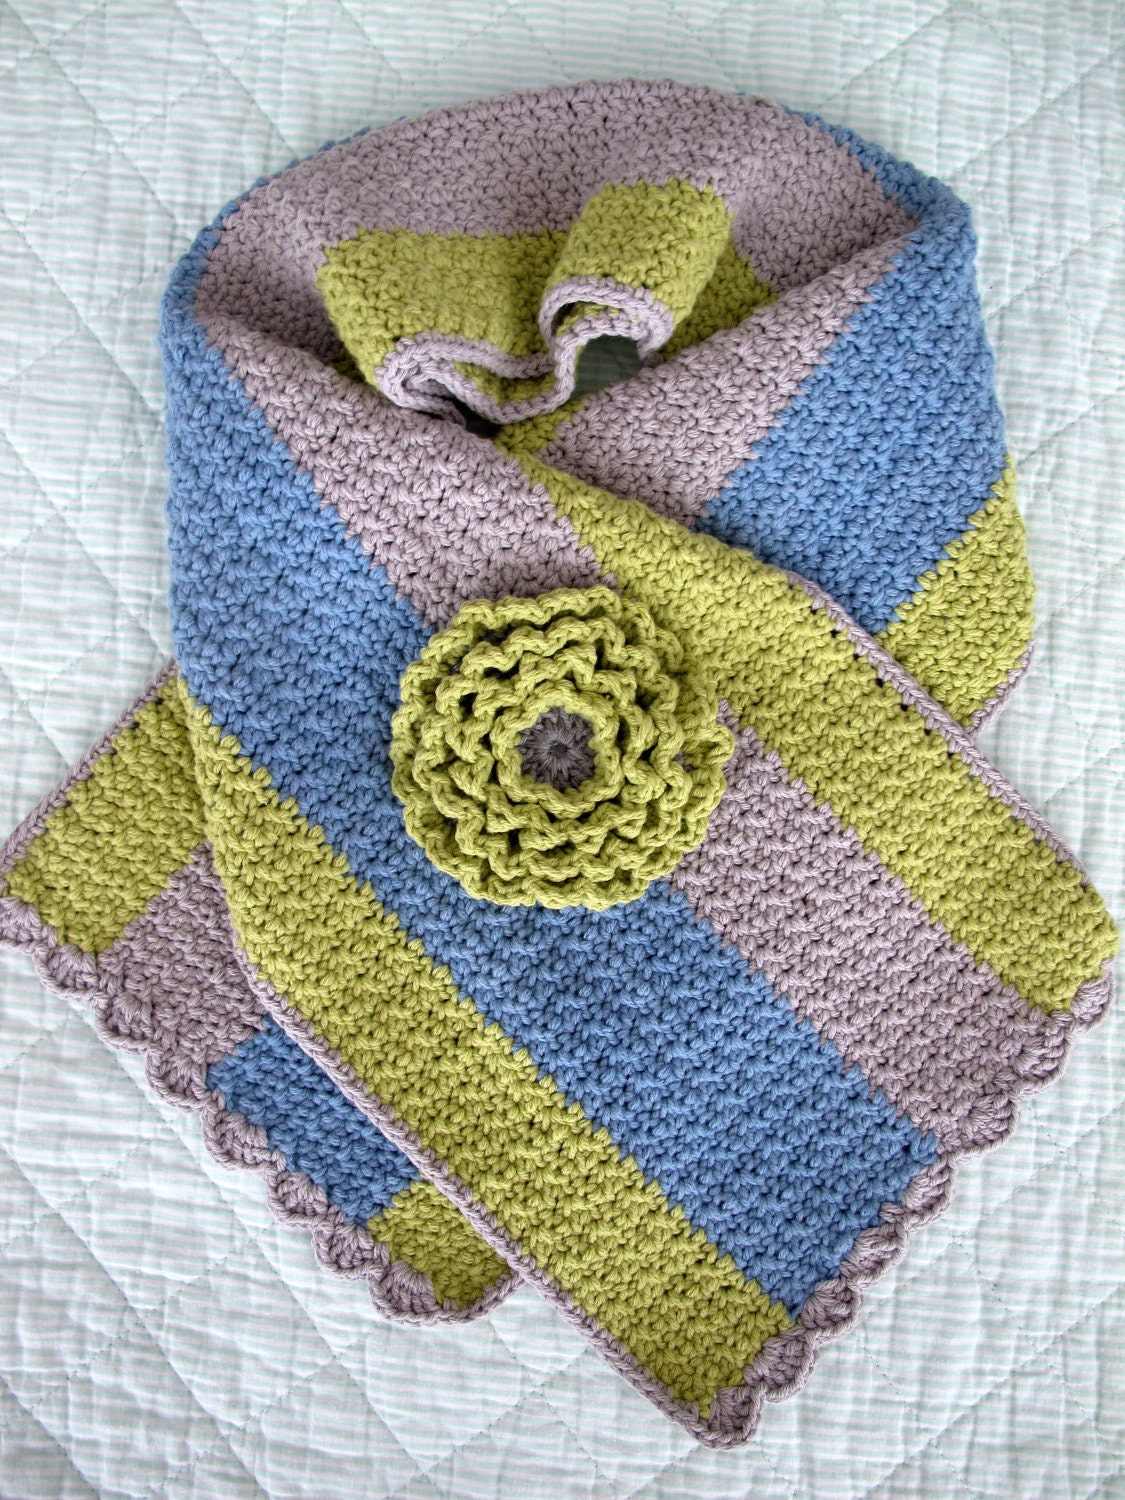 Crochet scarf striped in green grey and blue